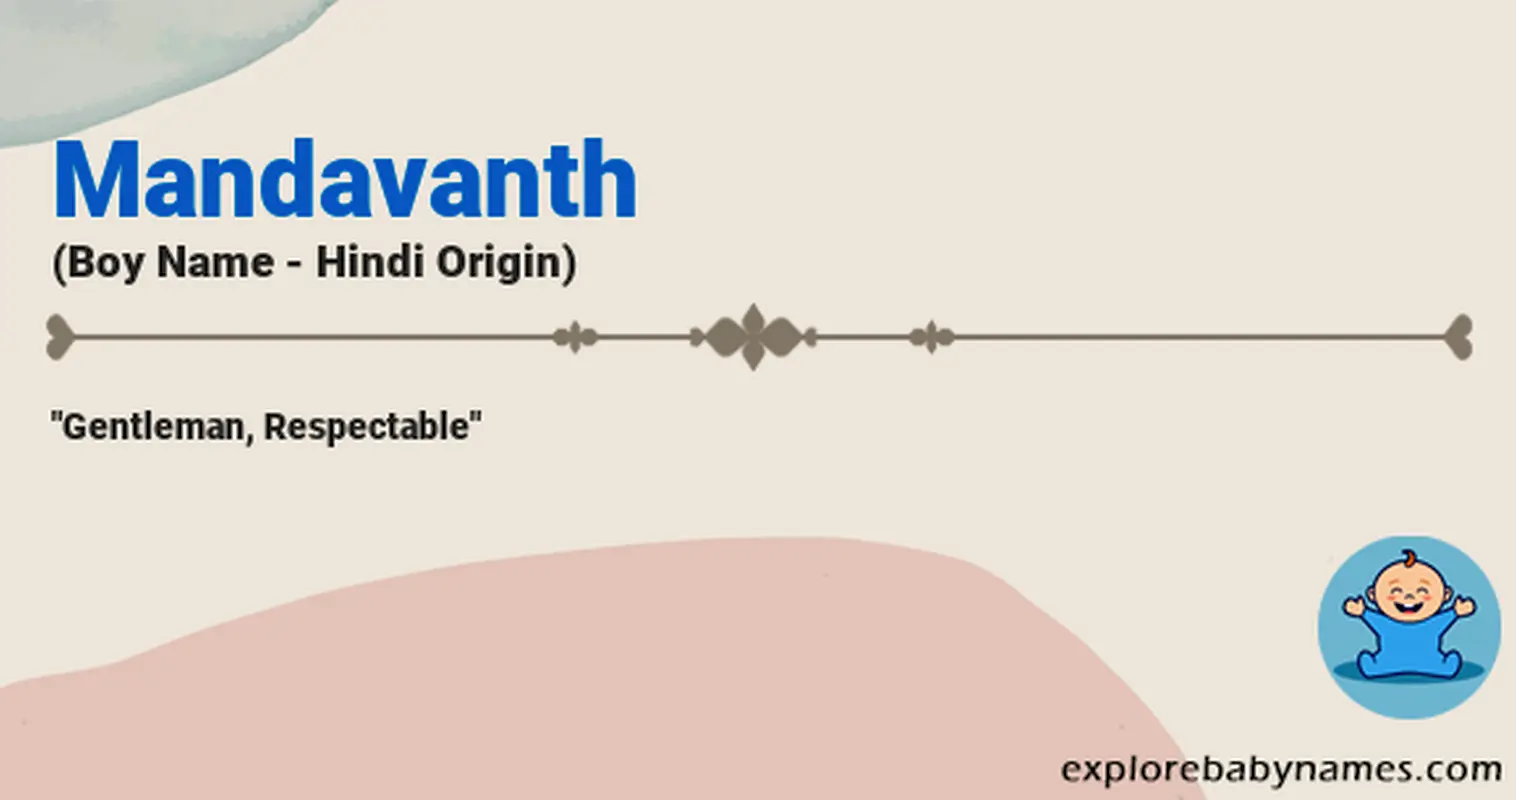 Meaning of Mandavanth